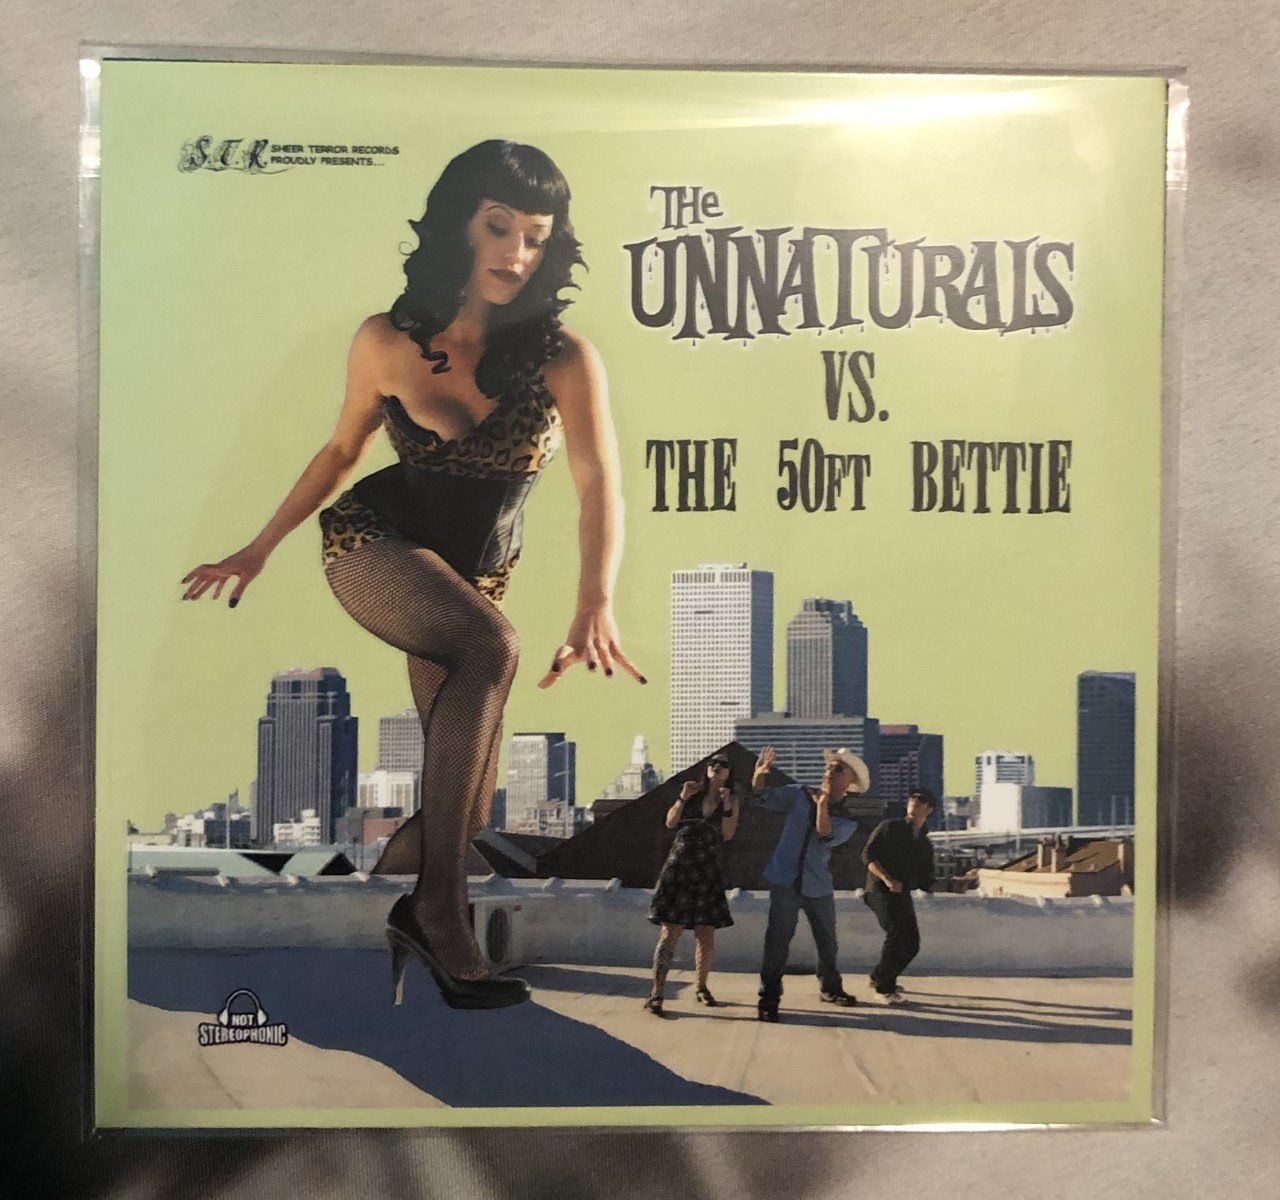 Image of The Unnaturals Vs The 50ft Bettie CD